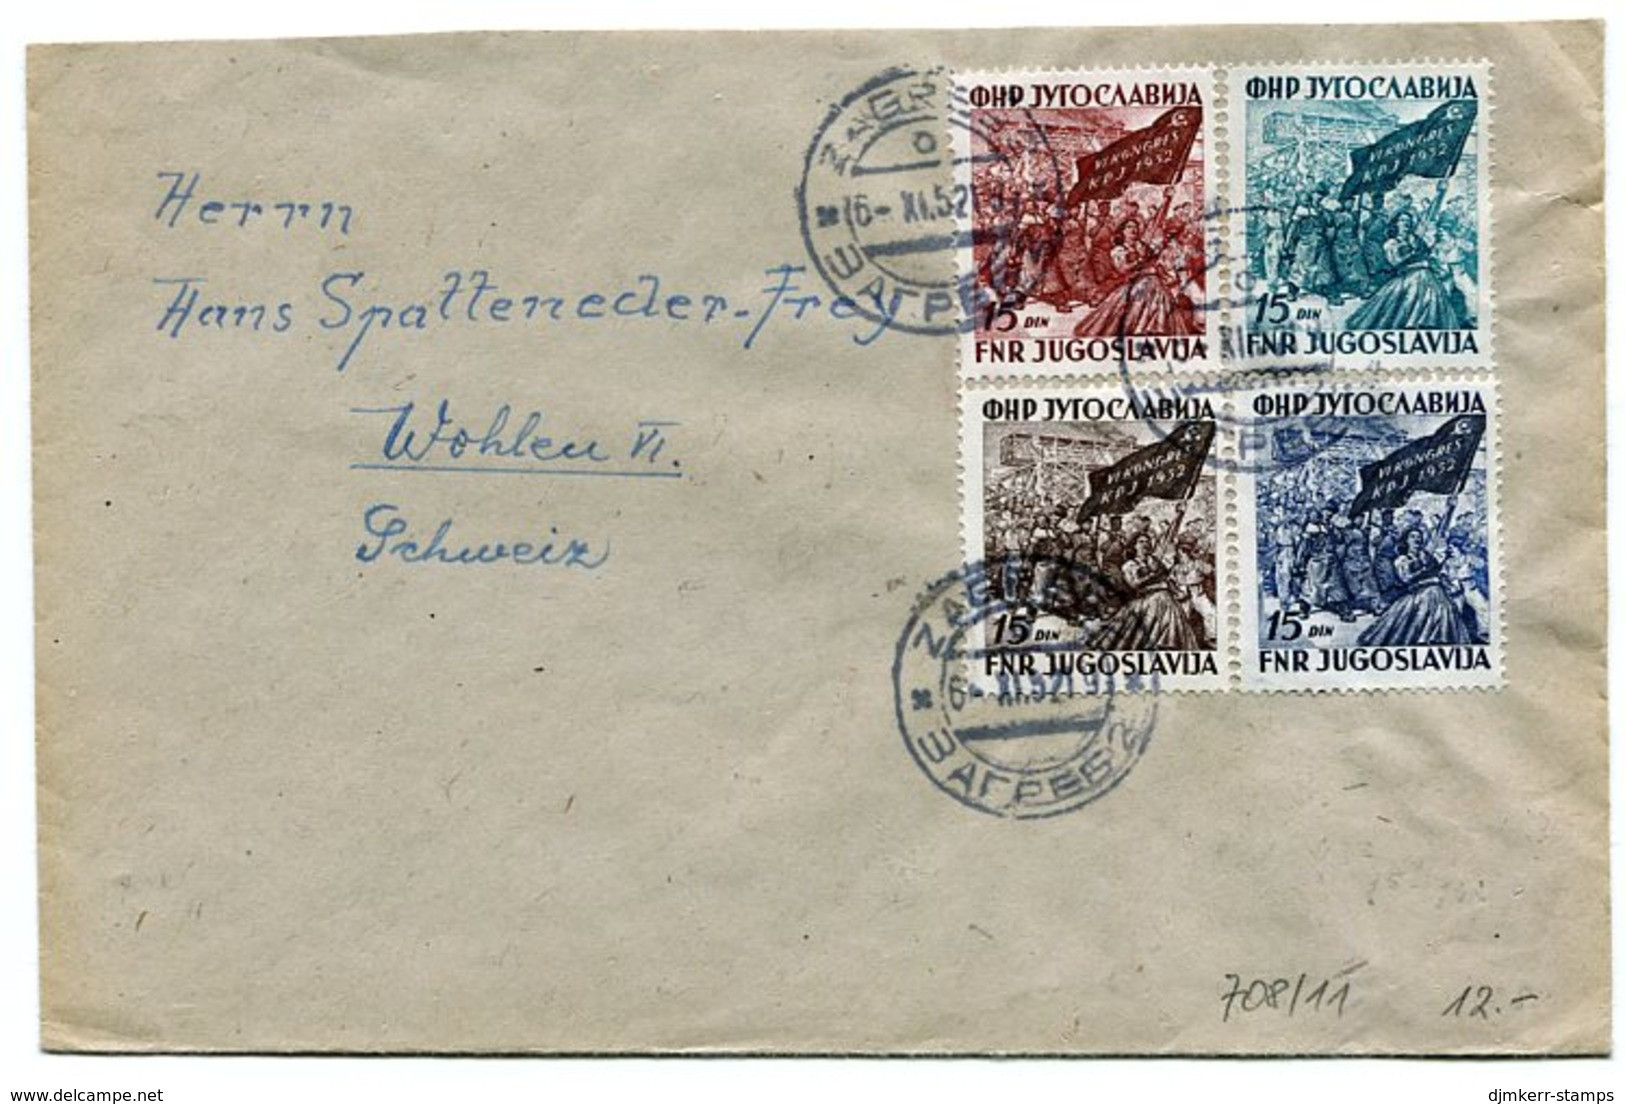 YUGOSLAVIA 1952 Communist Party Congress Set Used On Cover To Switzerland.  Michel 708-11 - Lettres & Documents